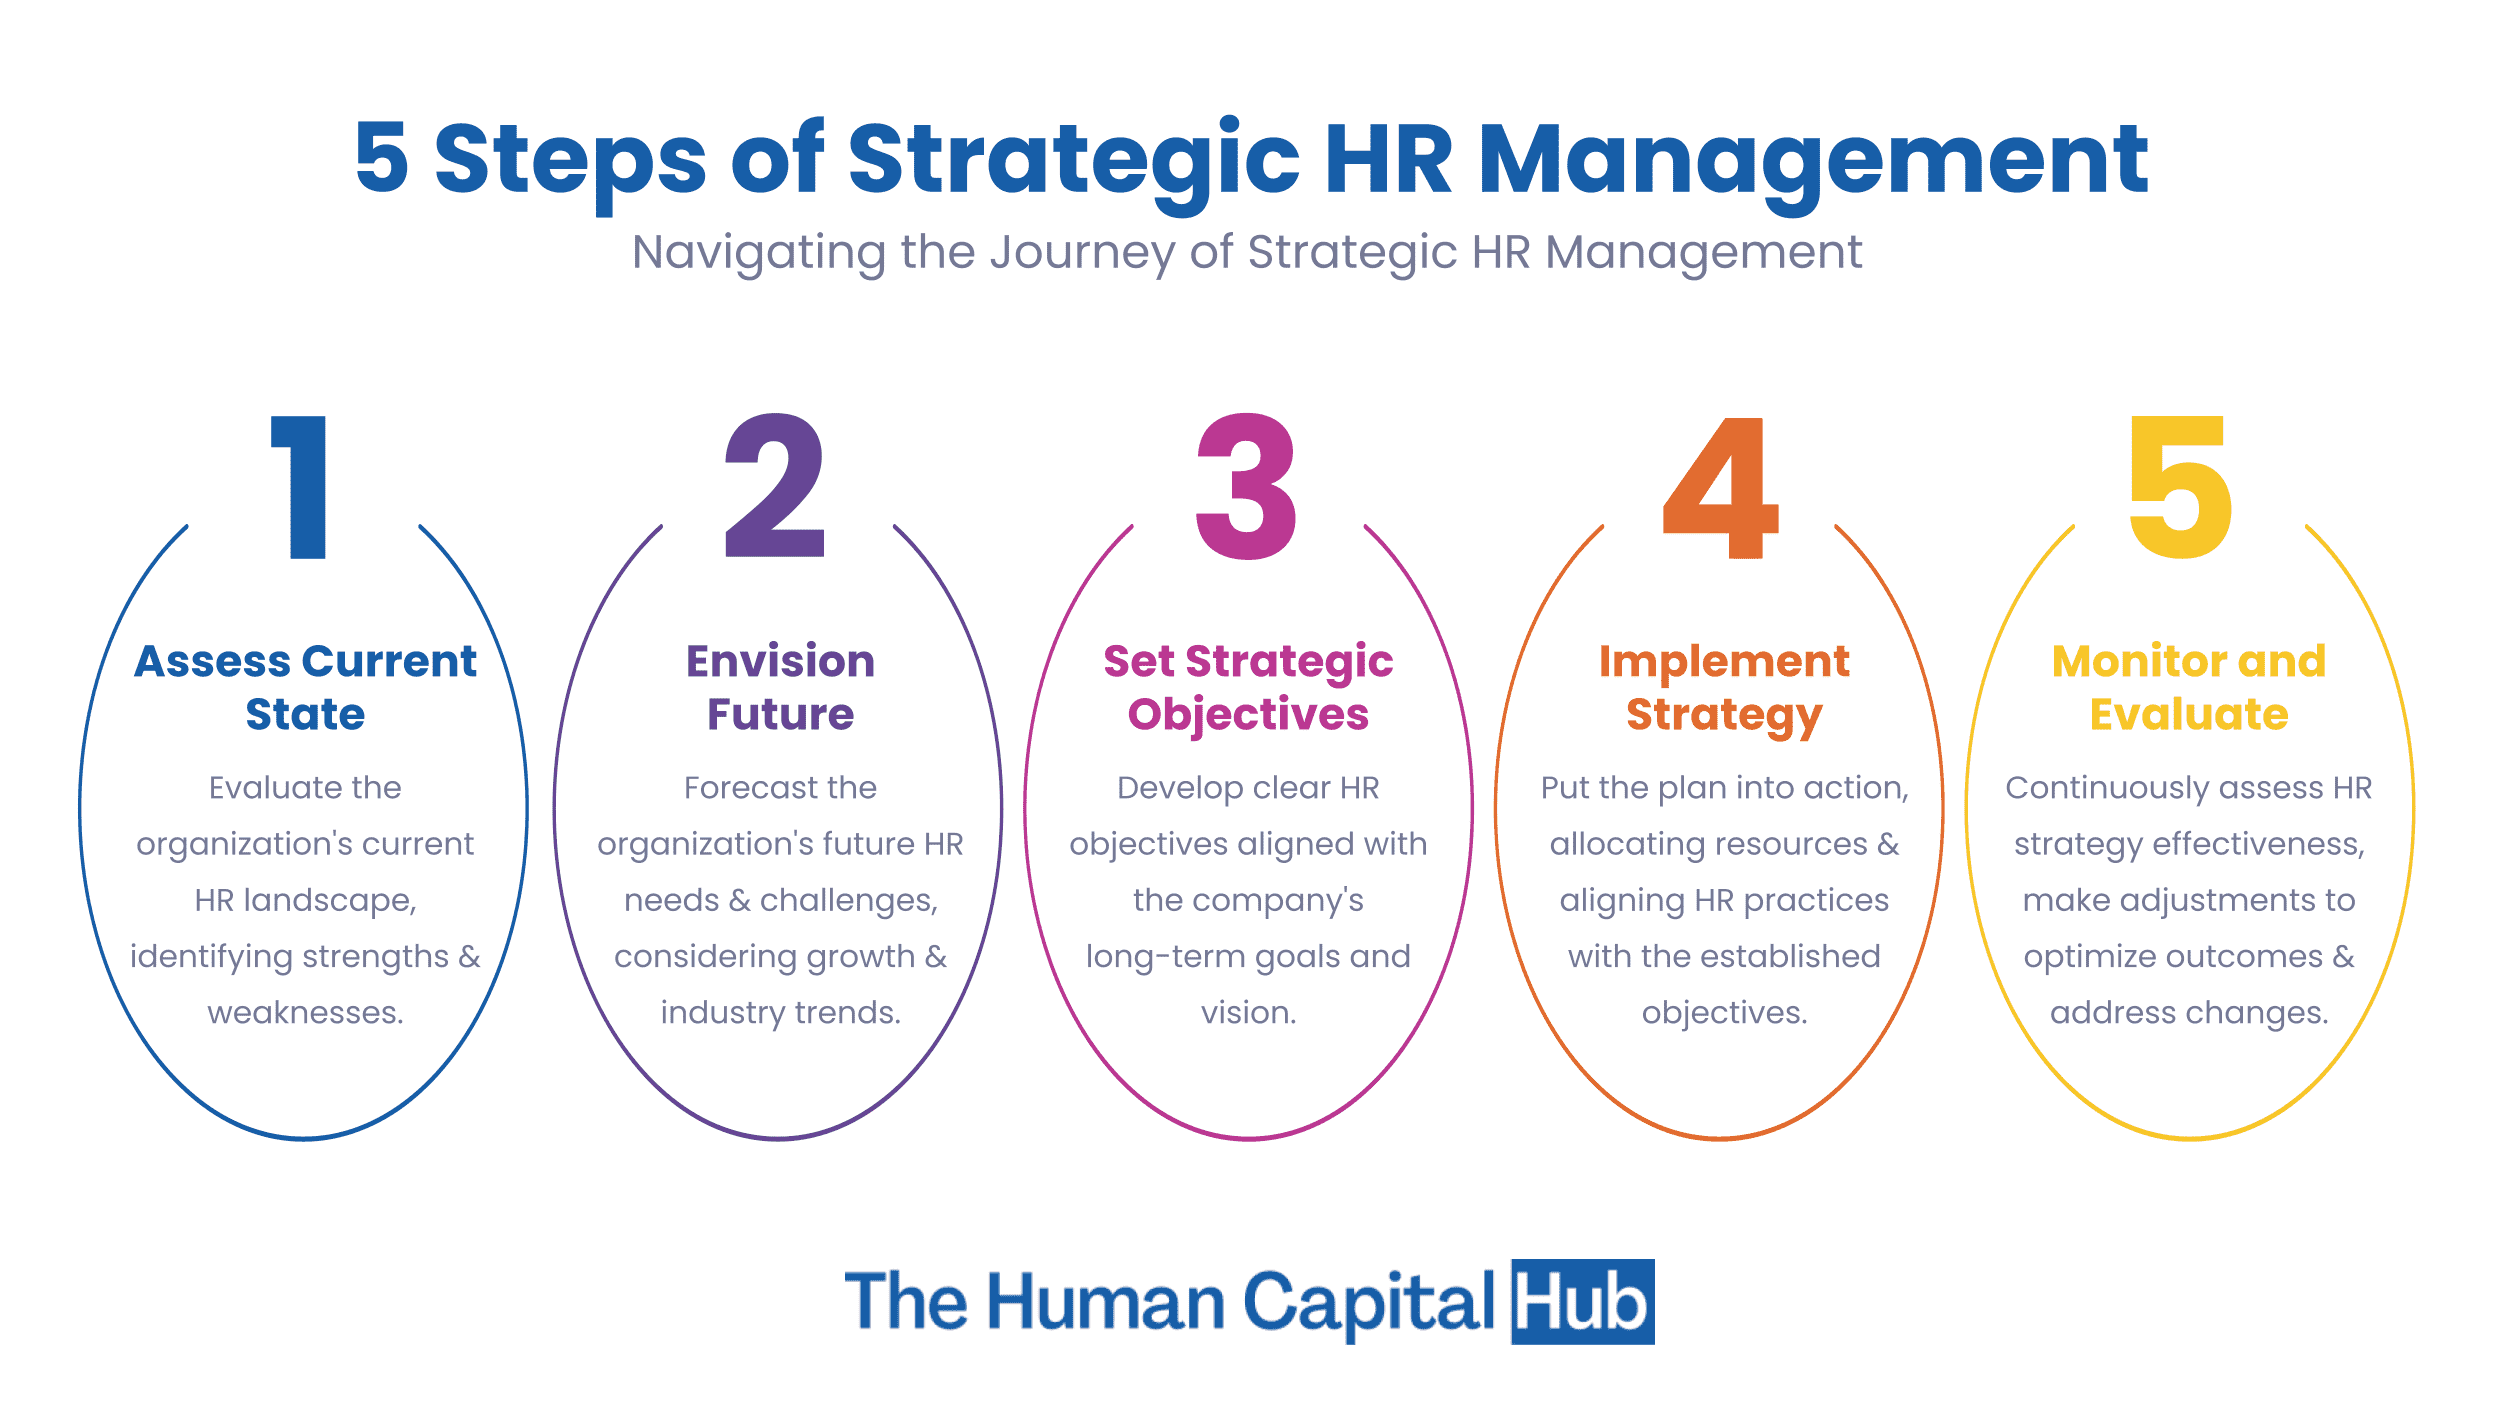 What are the 5 Steps of Strategic Human Resource Management?